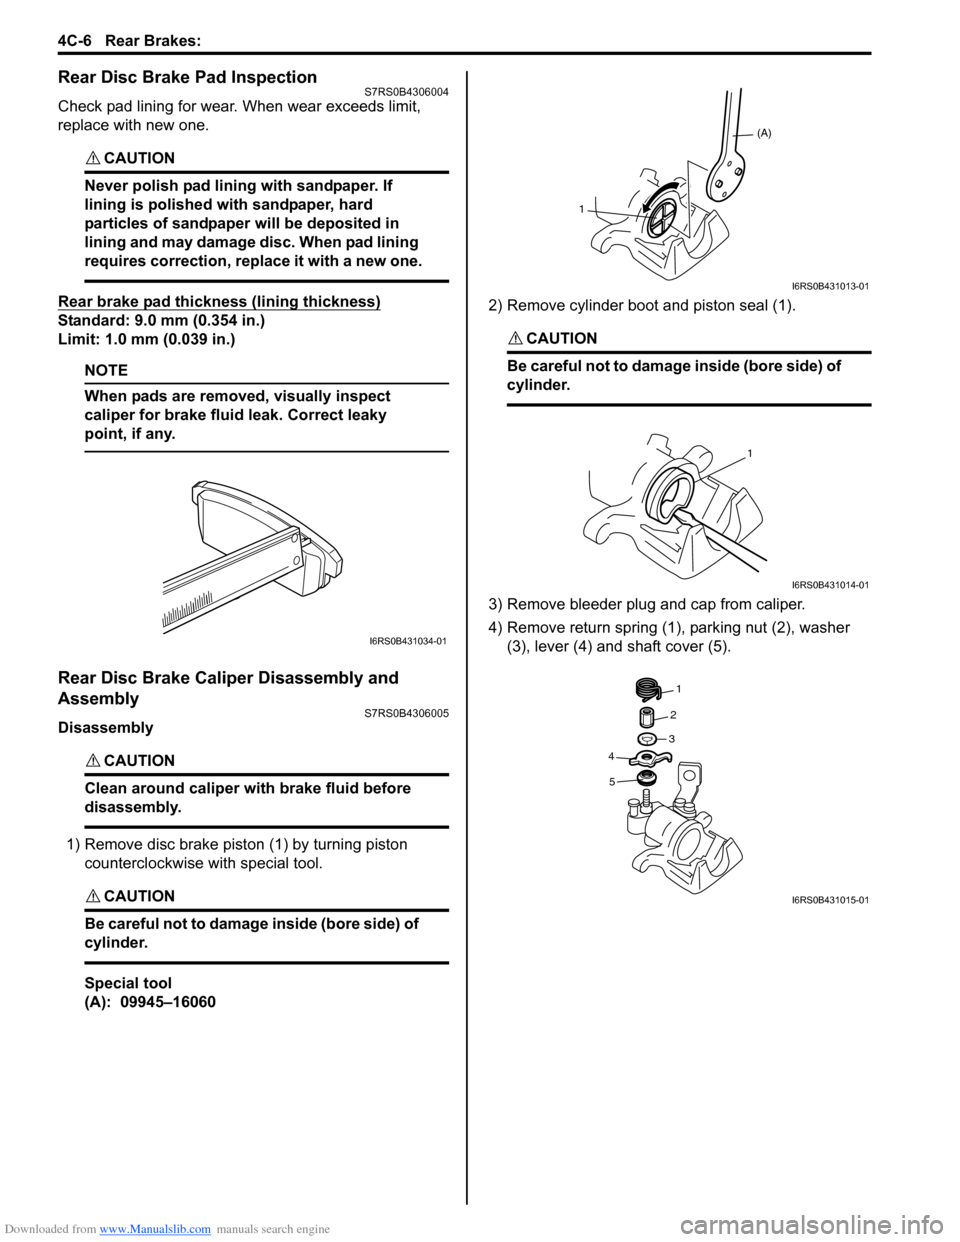 SUZUKI SWIFT 2004 2.G Service Workshop Manual Downloaded from www.Manualslib.com manuals search engine 4C-6 Rear Brakes: 
Rear Disc Brake Pad InspectionS7RS0B4306004
Check pad lining for wear. When wear exceeds limit, 
replace with new one.
CAUTI